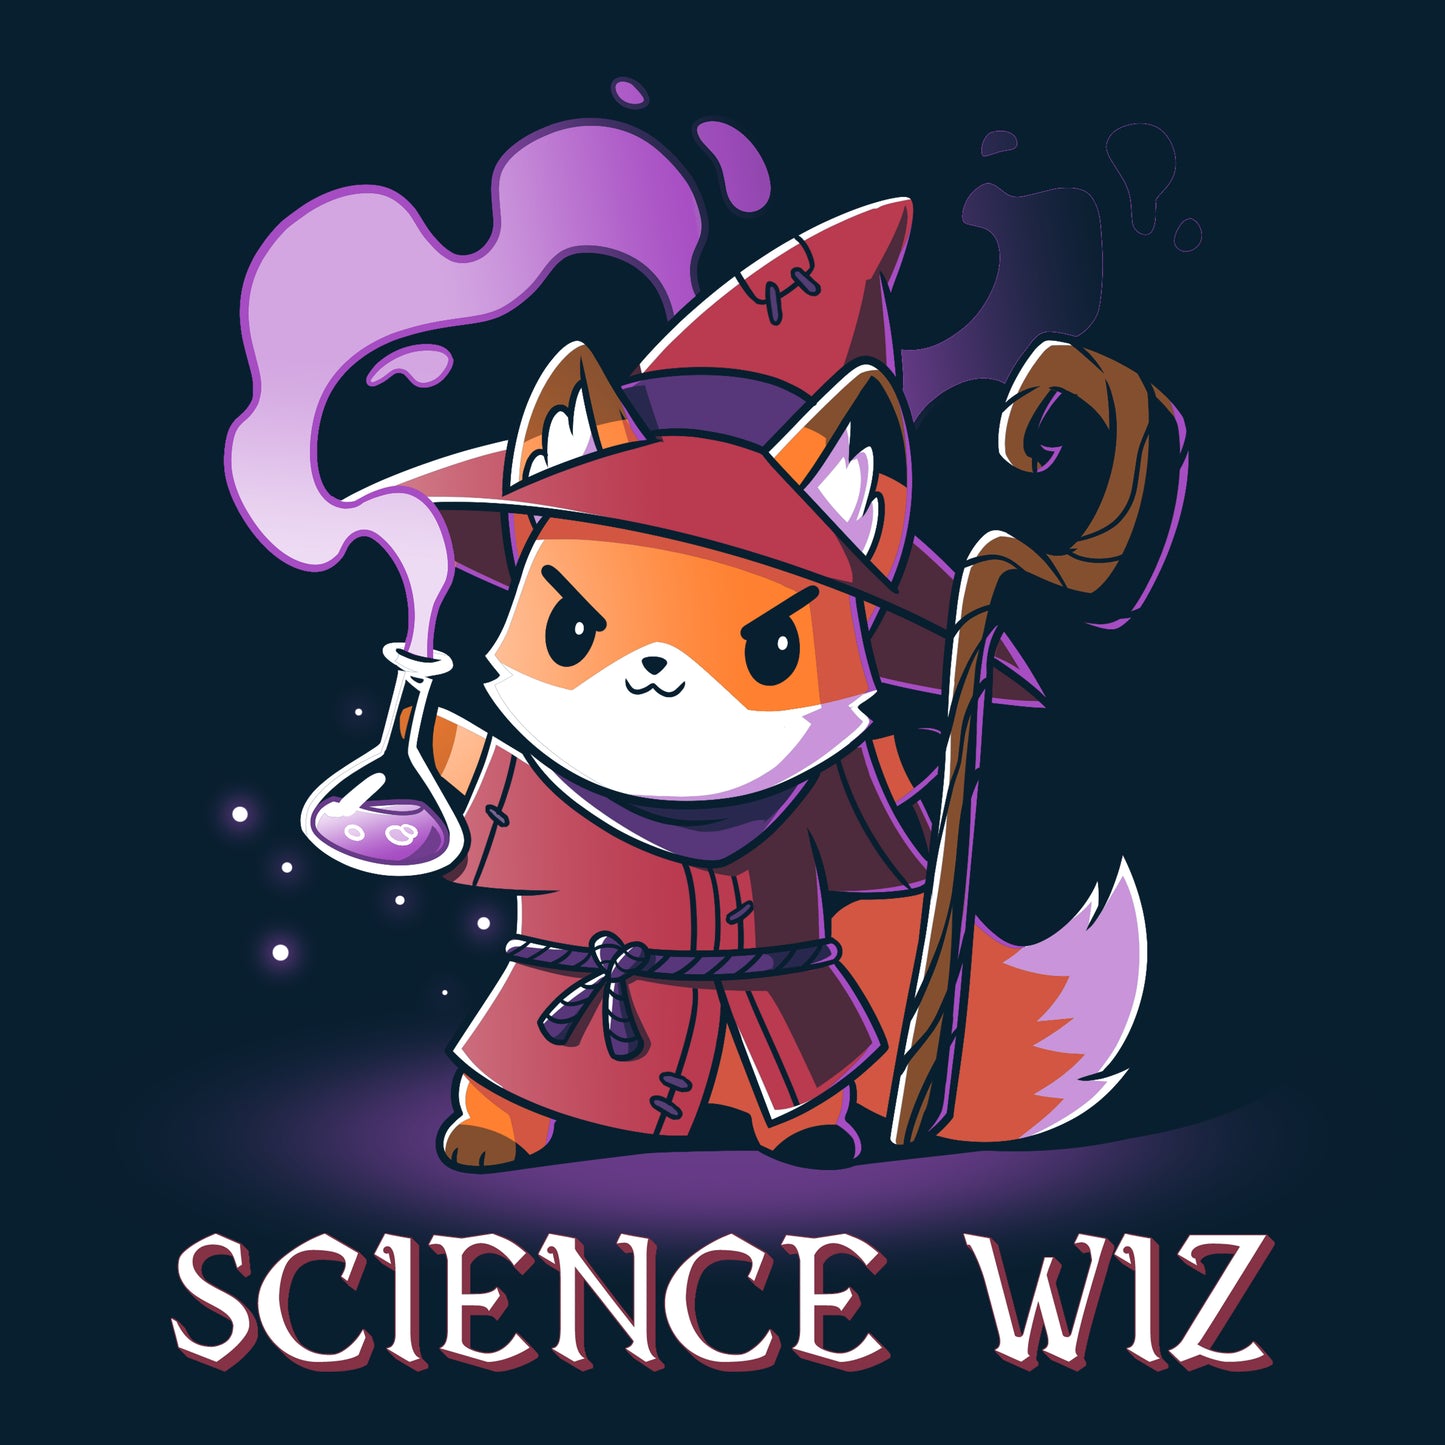 An illustration of a fox wearing a wizard outfit holding a beaker with purple liquid and a staff. The text "Science Wiz" is below the fox, ready to adorn a navy blue t-shirt made from super soft ringspun cotton by monsterdigital.